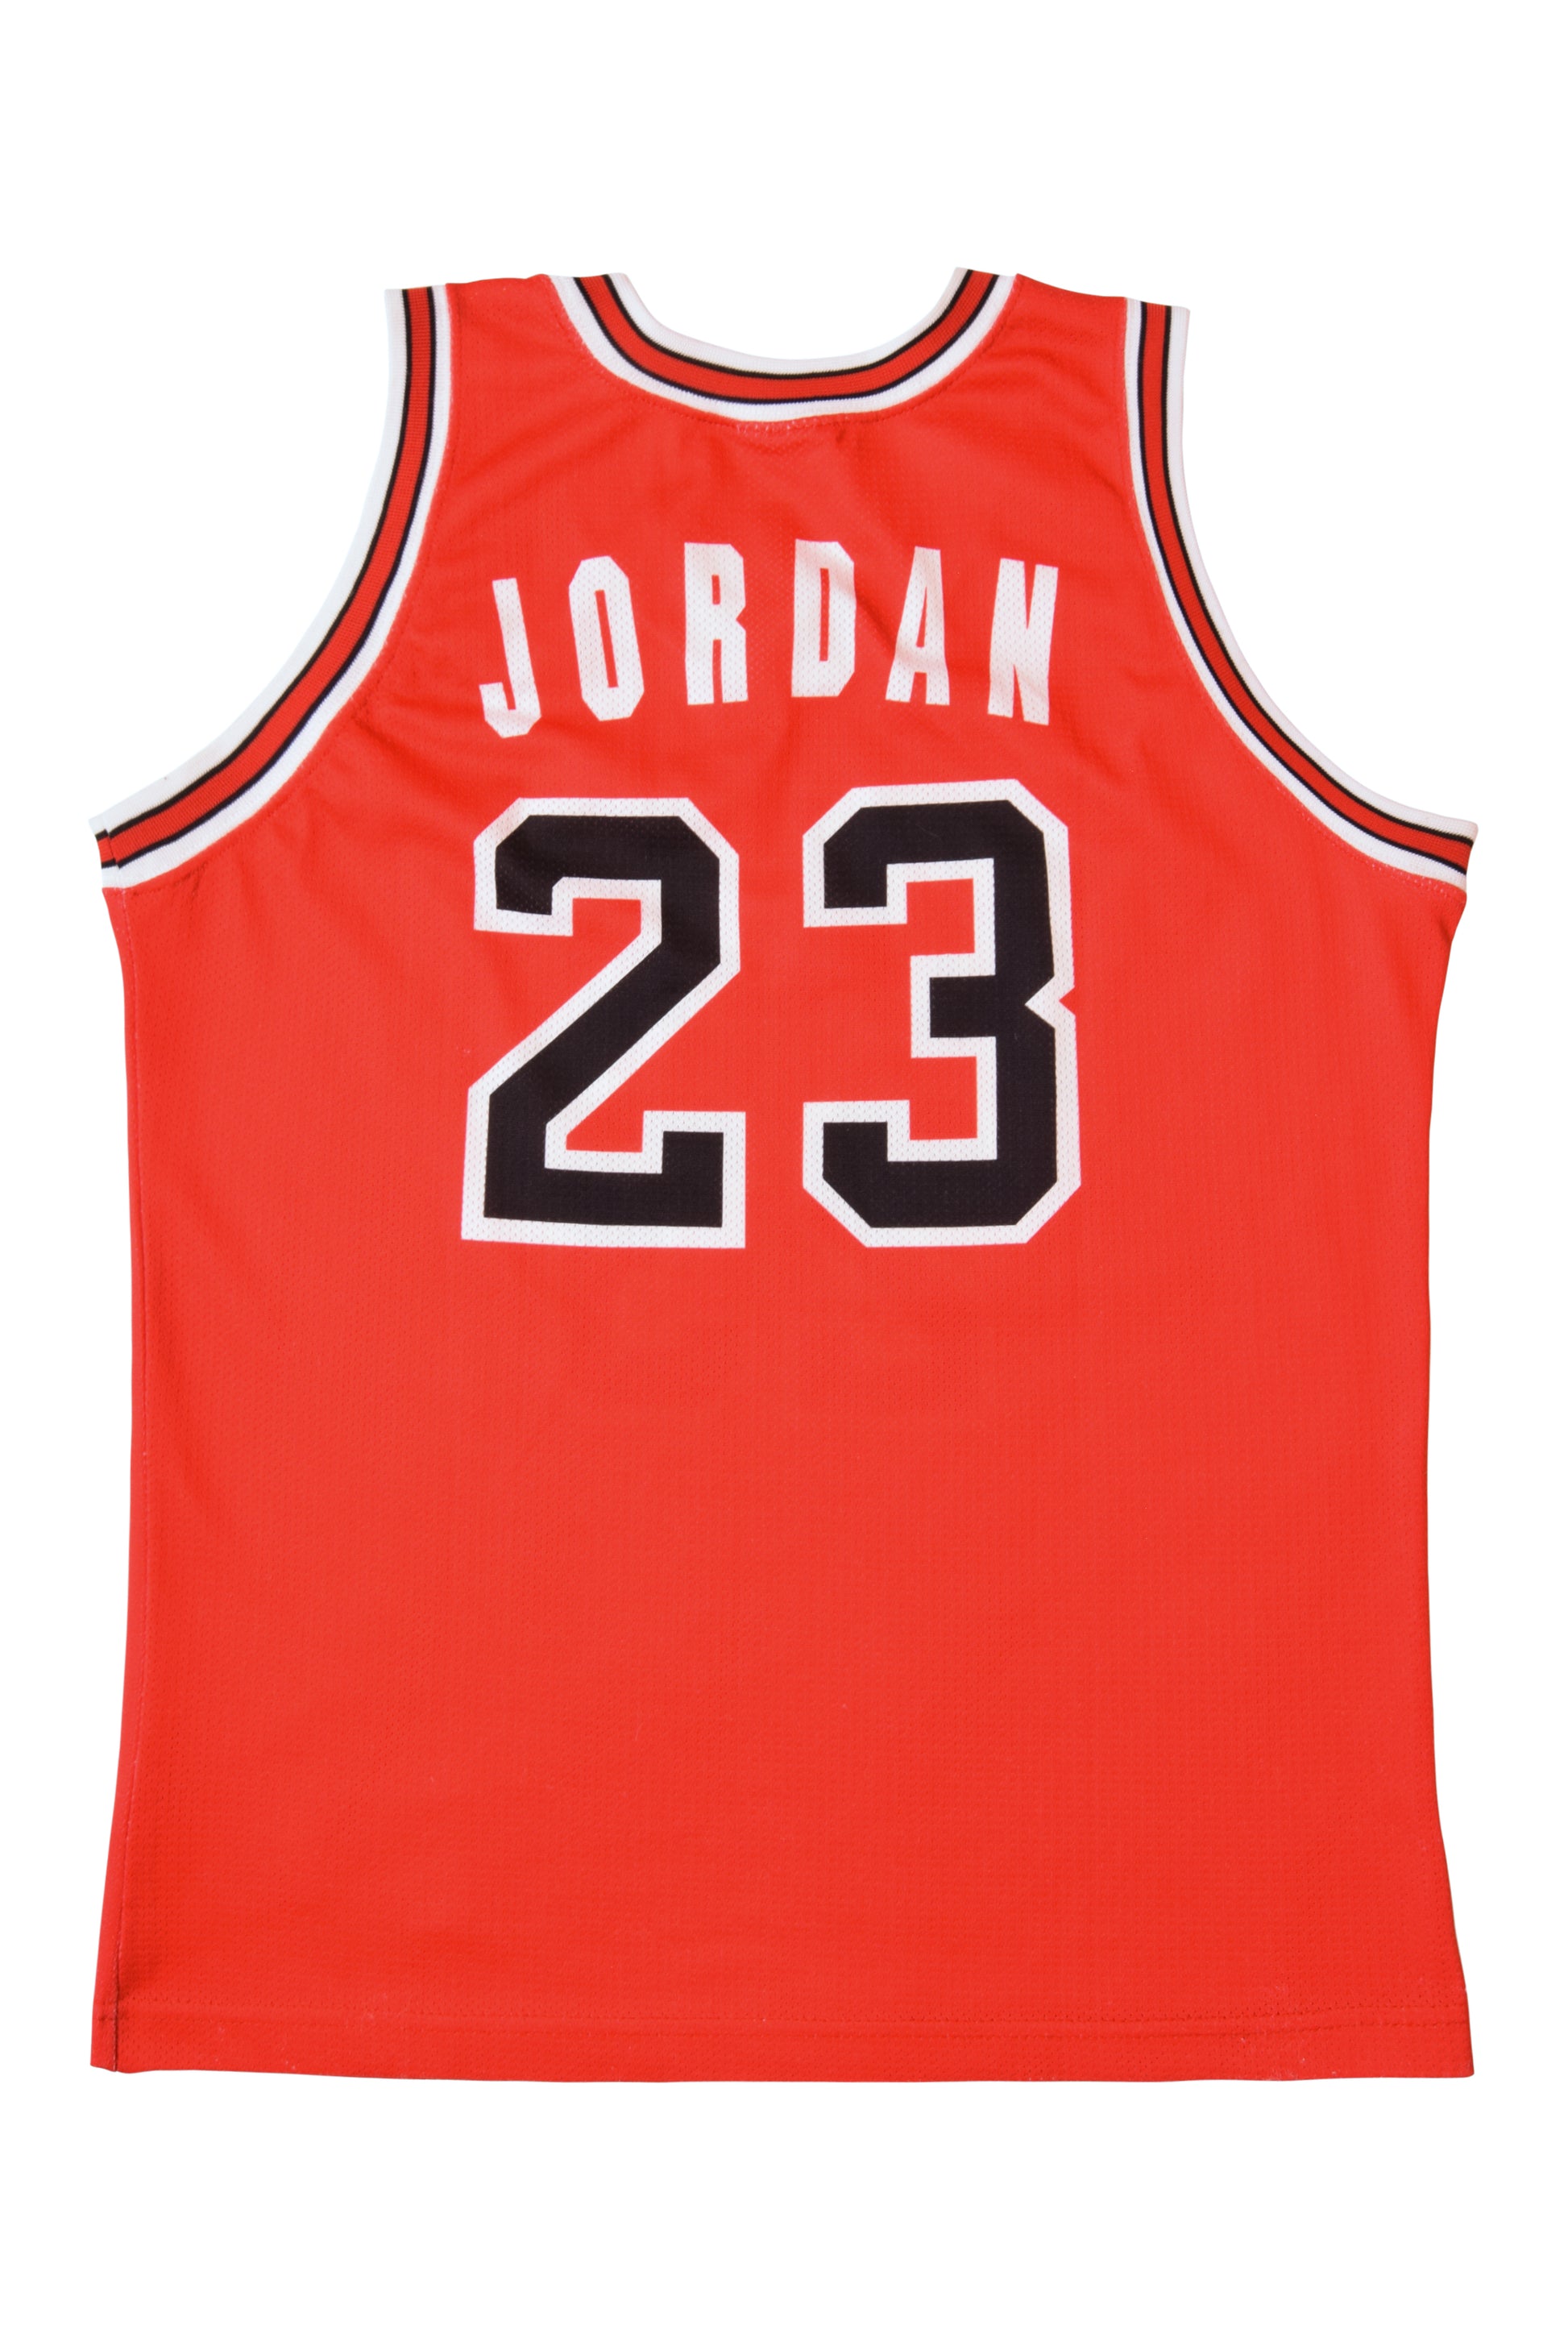 Vintage Jordan Chicago Bulls Champion Jersey Made in Italy Size S-M Red 23 90's